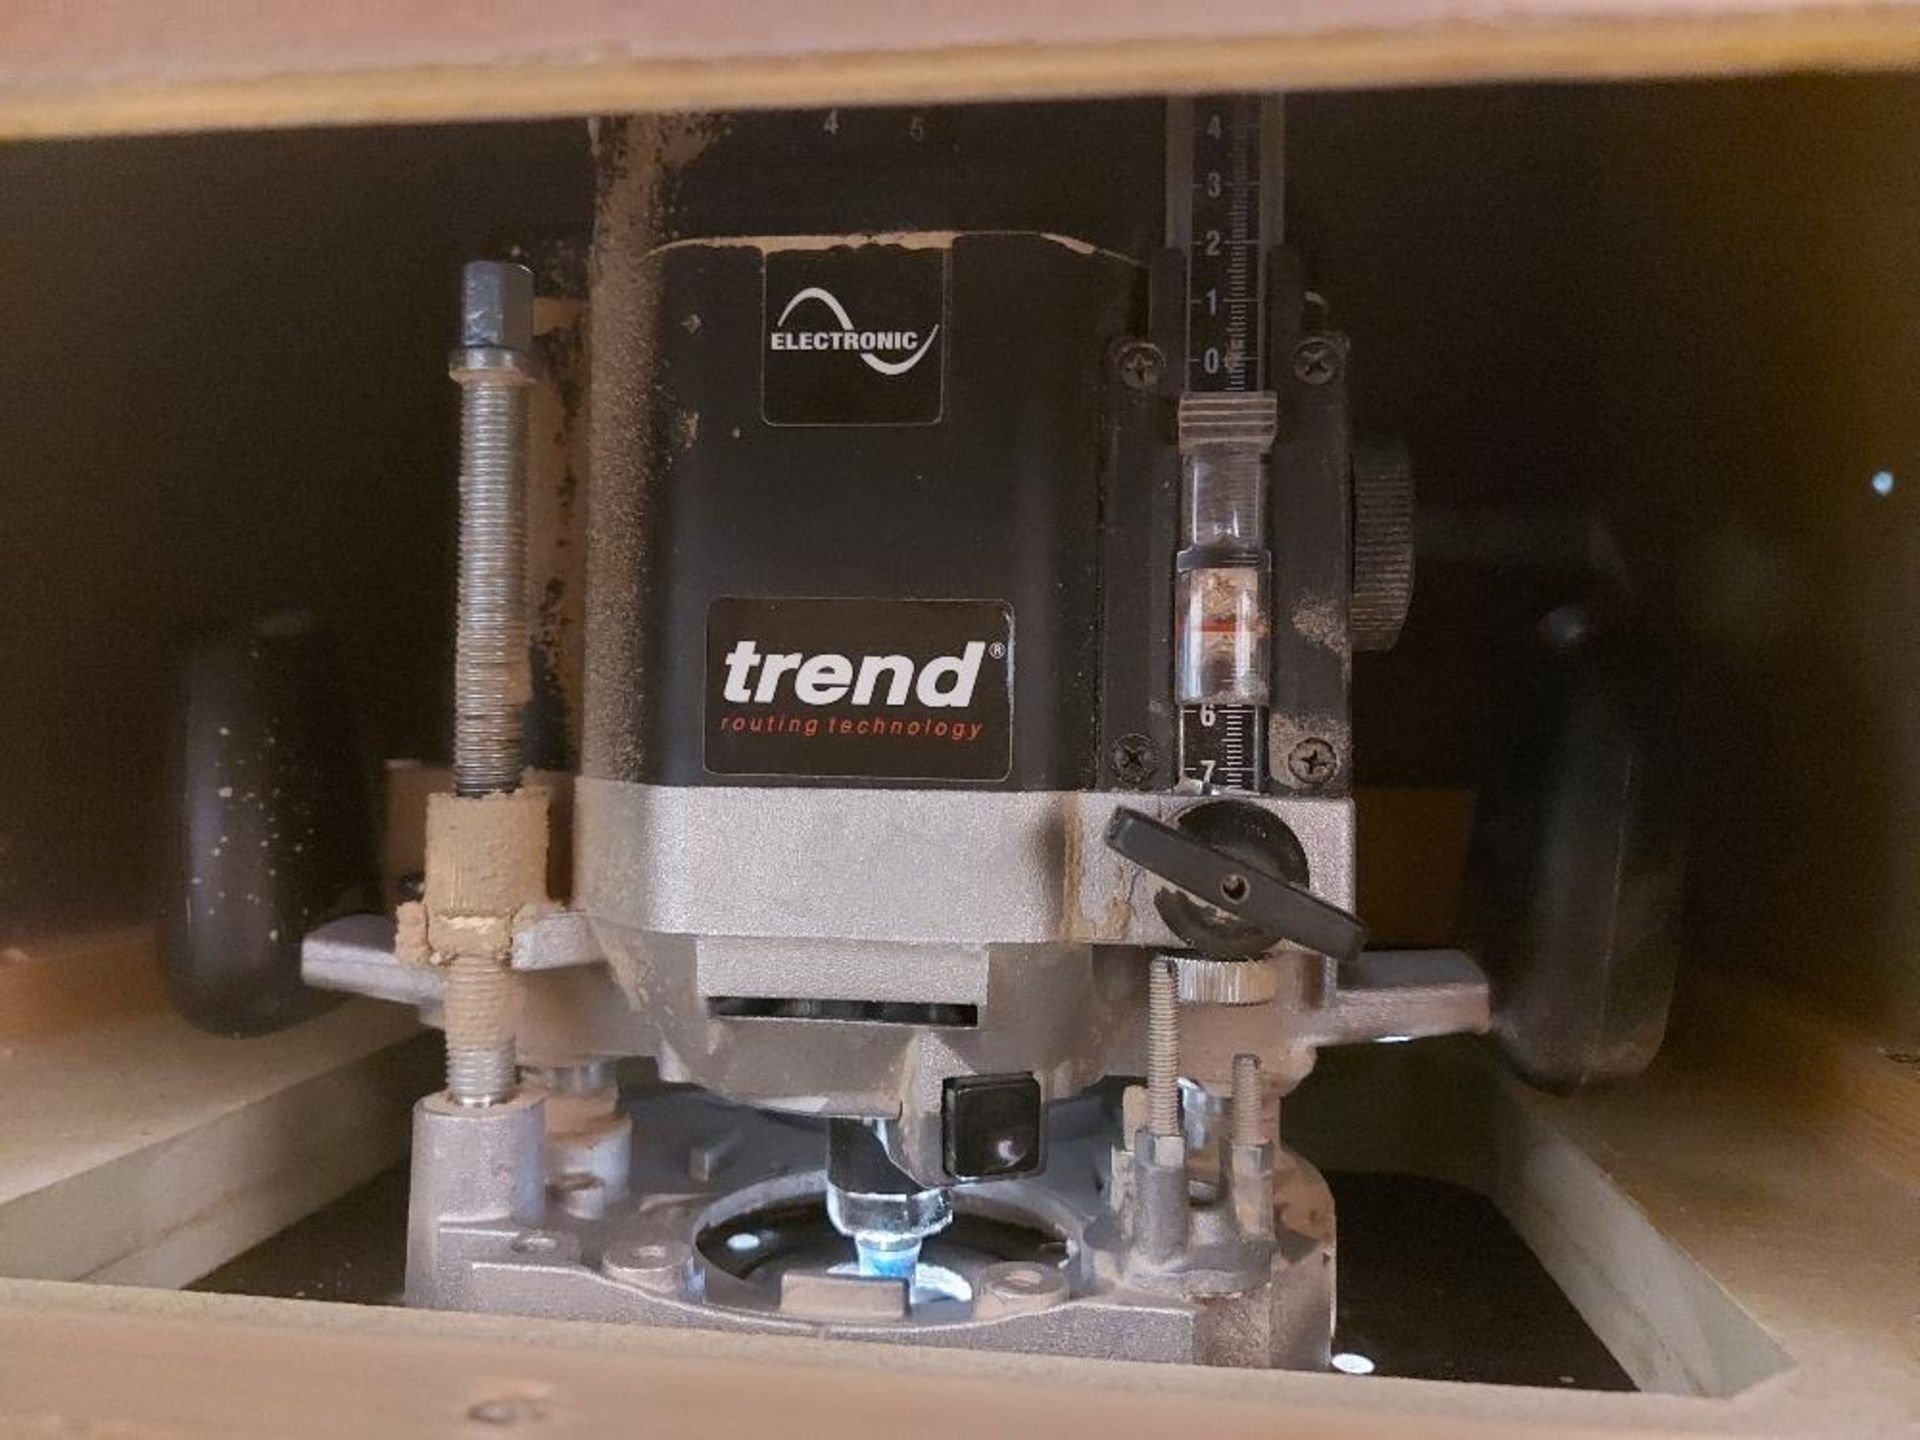 Fabricated Router Workbench With Trend Plunge Router & Karcher MV 3 P Vacuum - Image 3 of 4